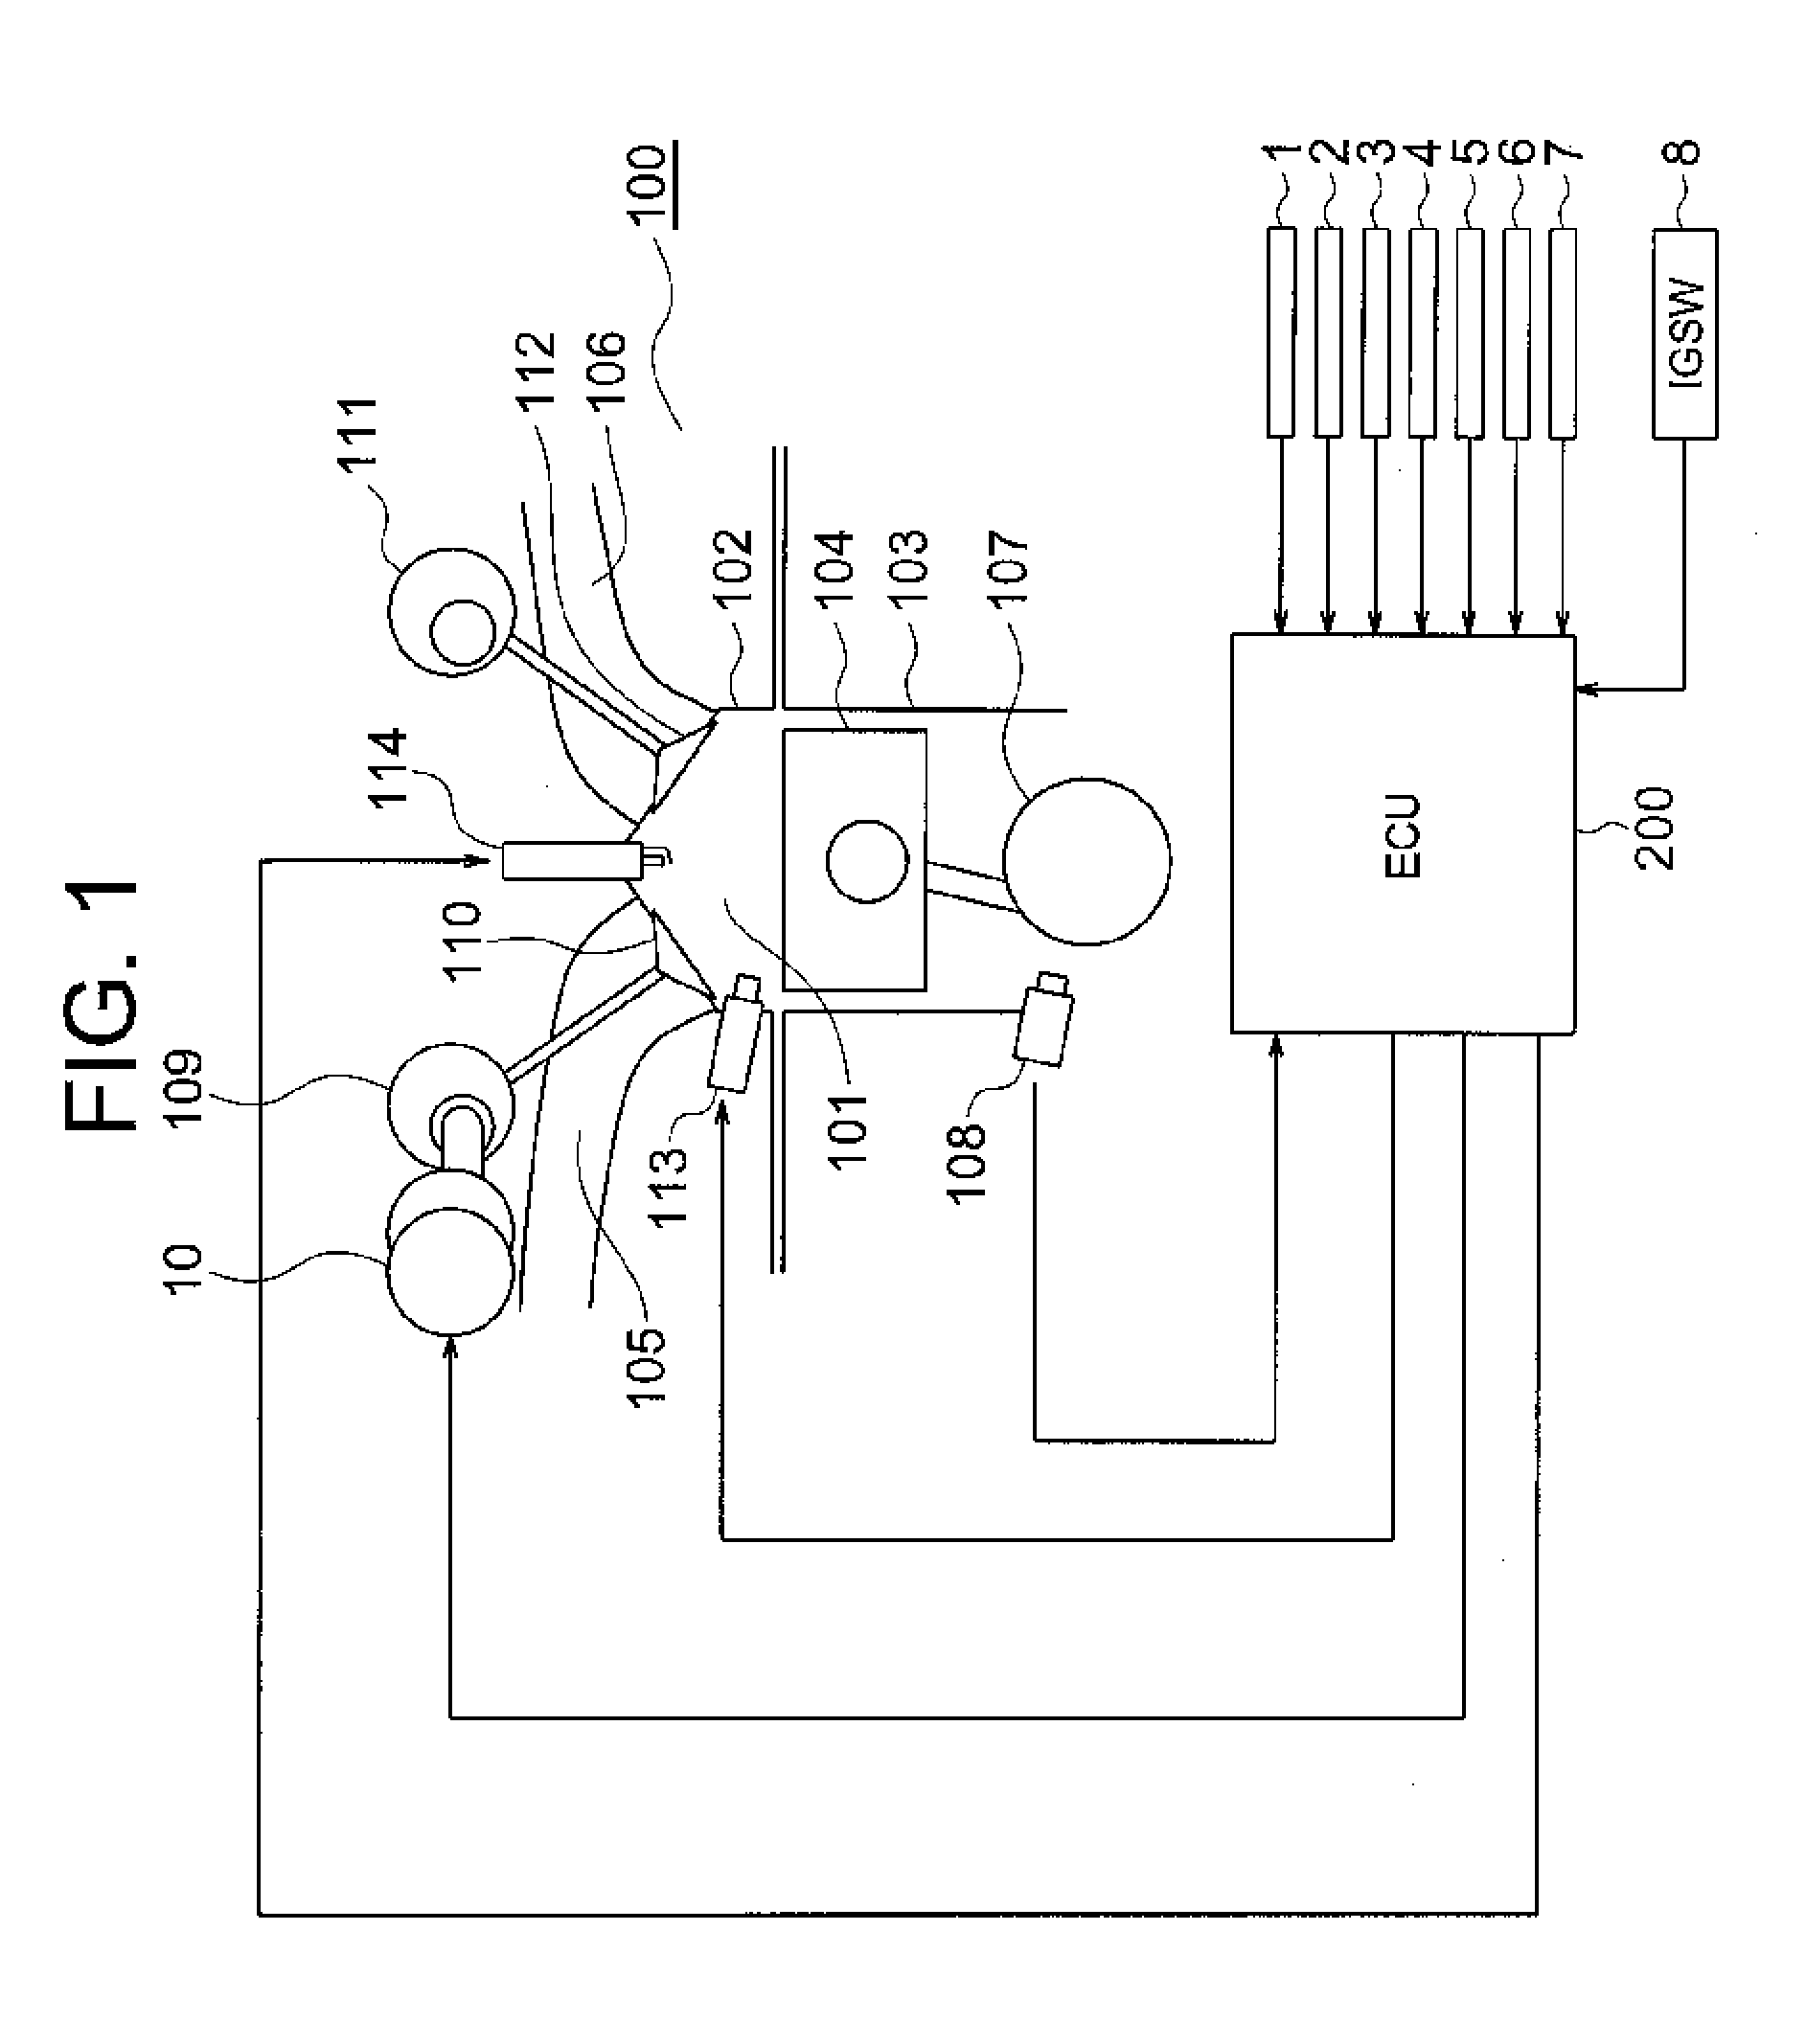 Pre-ignition estimation/control device for an internal combustion engine